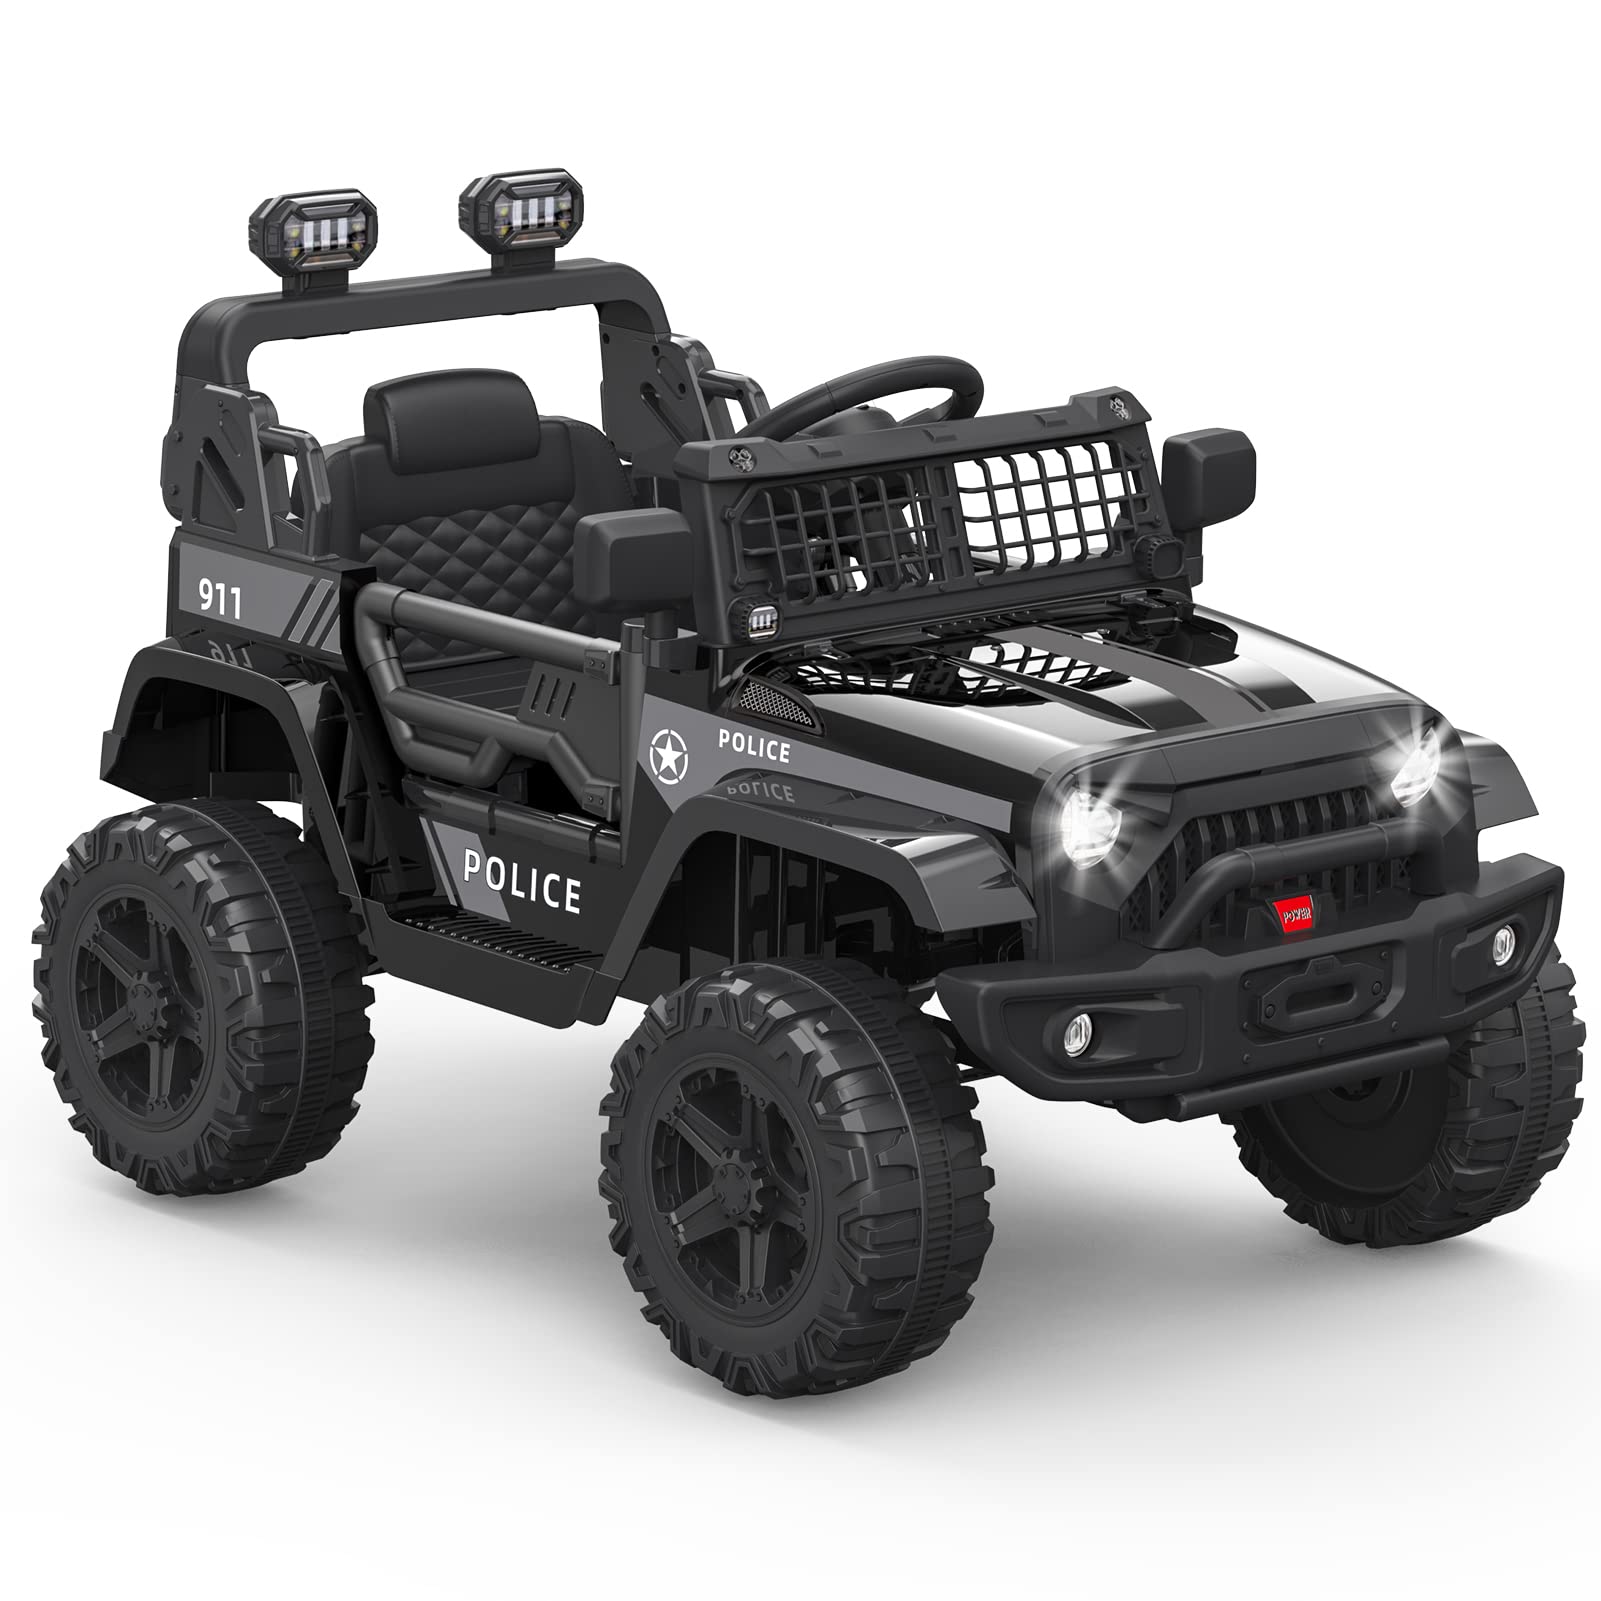 Ride on Truck Car 12V Kids Electric Mini Jeep with Remote Control Spring Suspension, LED Lights, Bluetooth, 2 Speeds (Black) - image 5 of 8